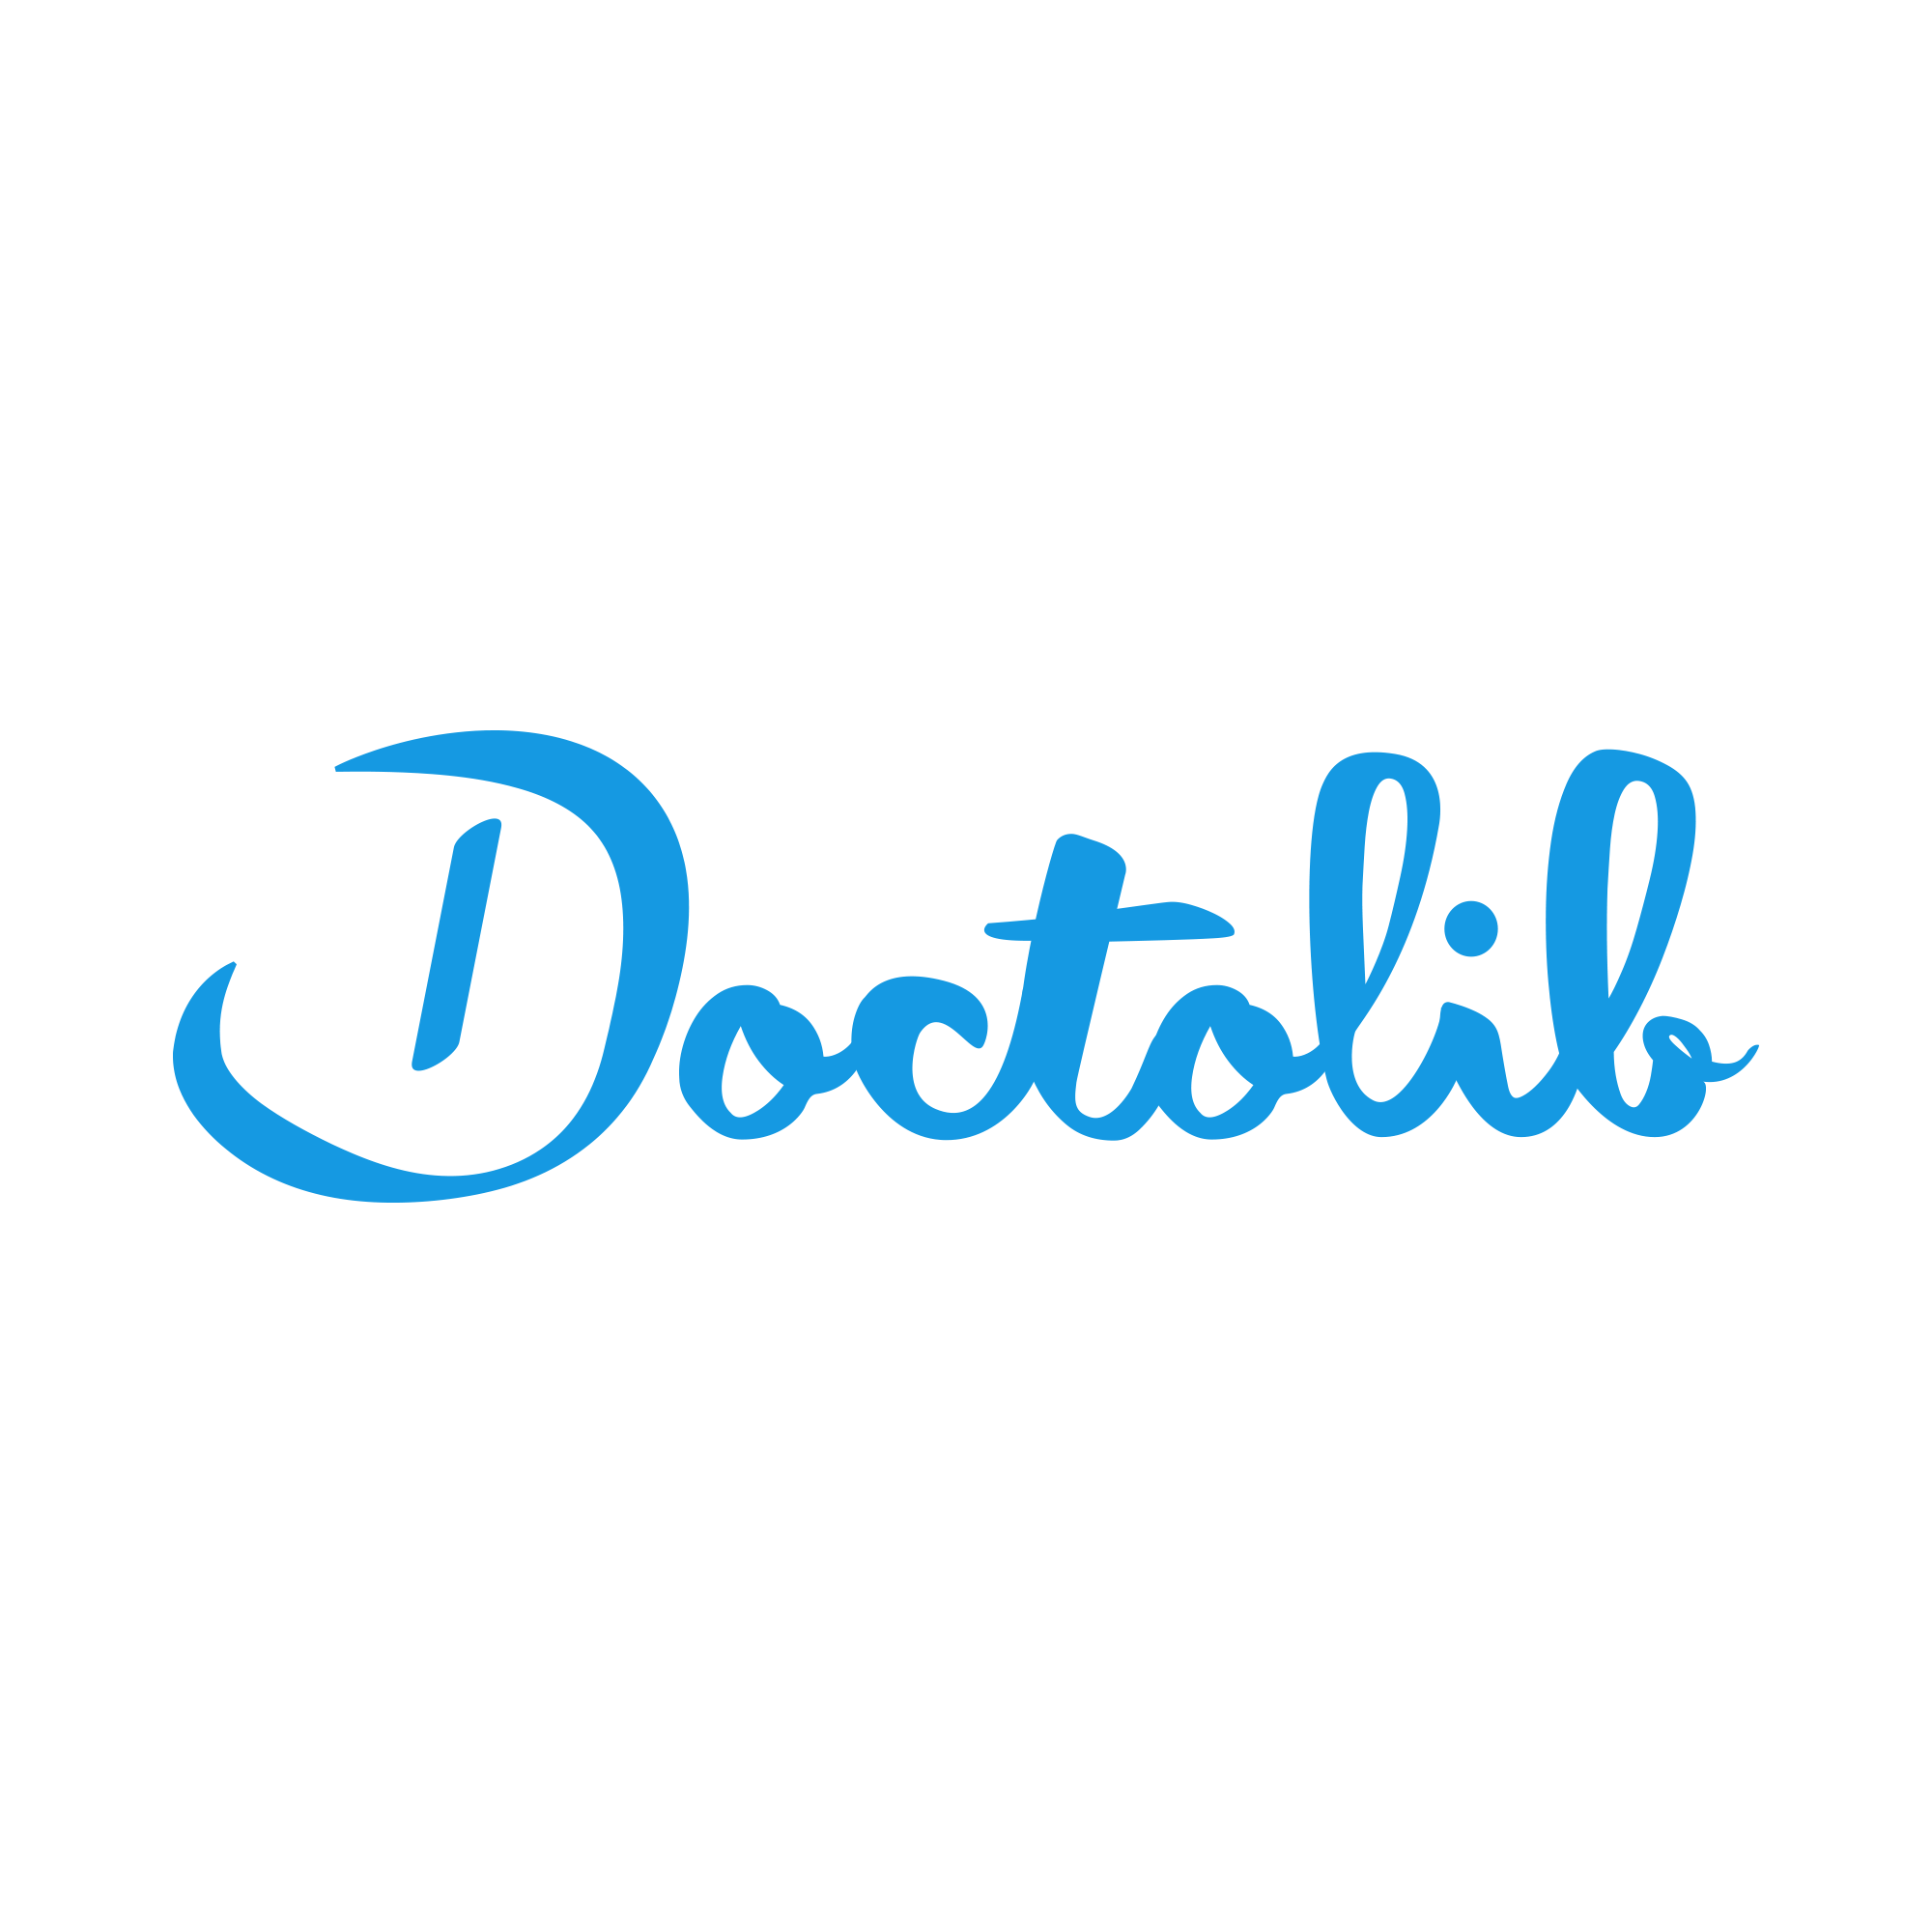 Doctolib is present in France and Germany